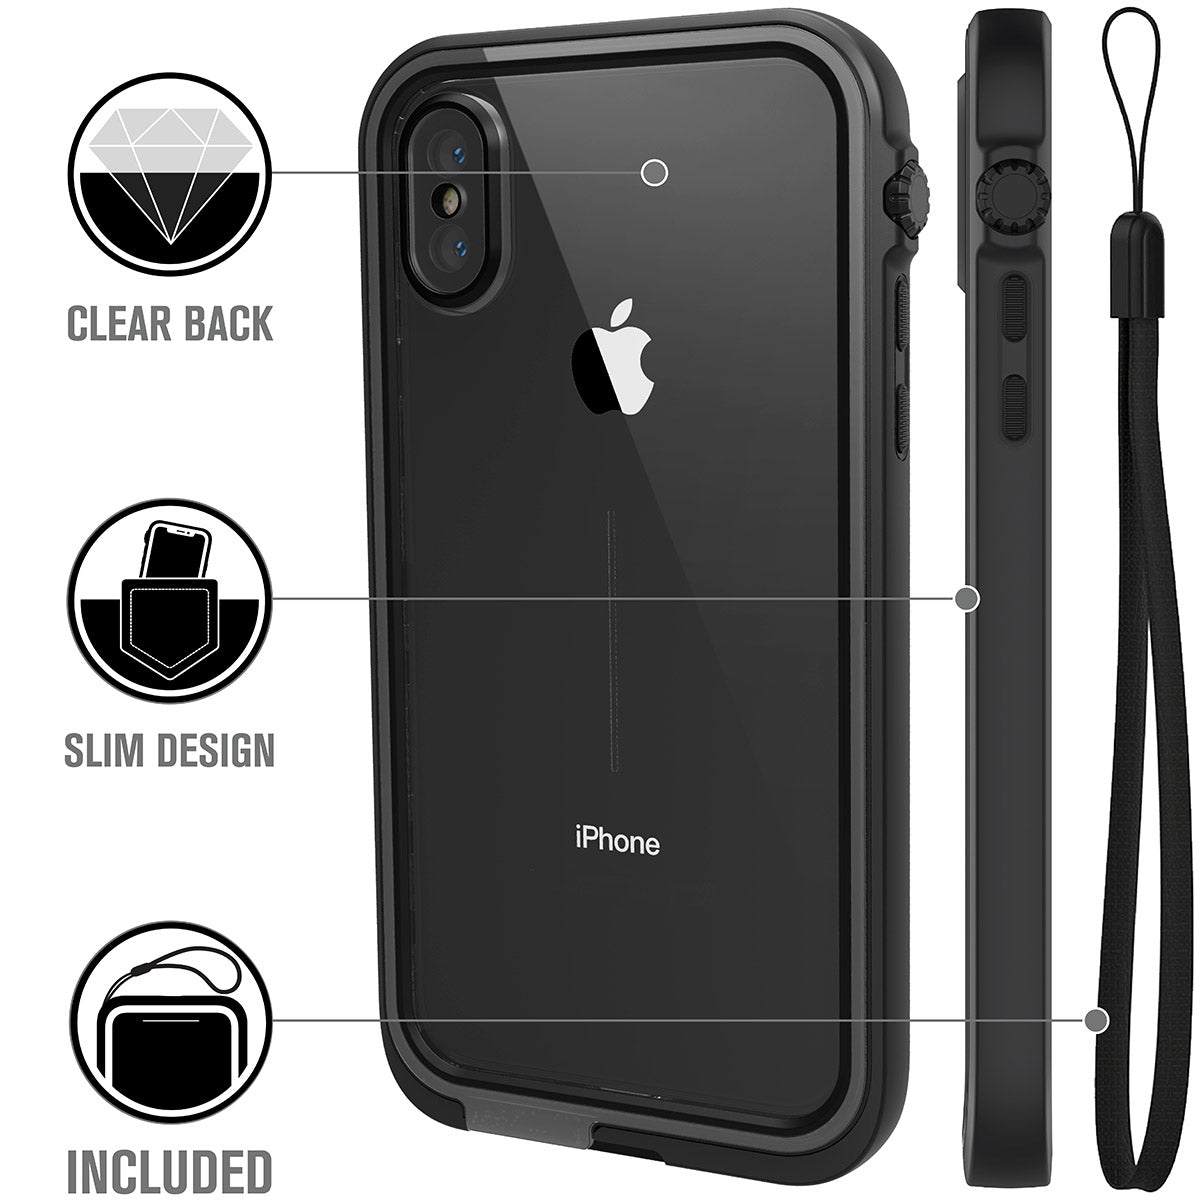 Catalyst iphone x/xr/xs/xs max waterproof case x showing the case features with lanyard in stealth black text reads clear back slim design included